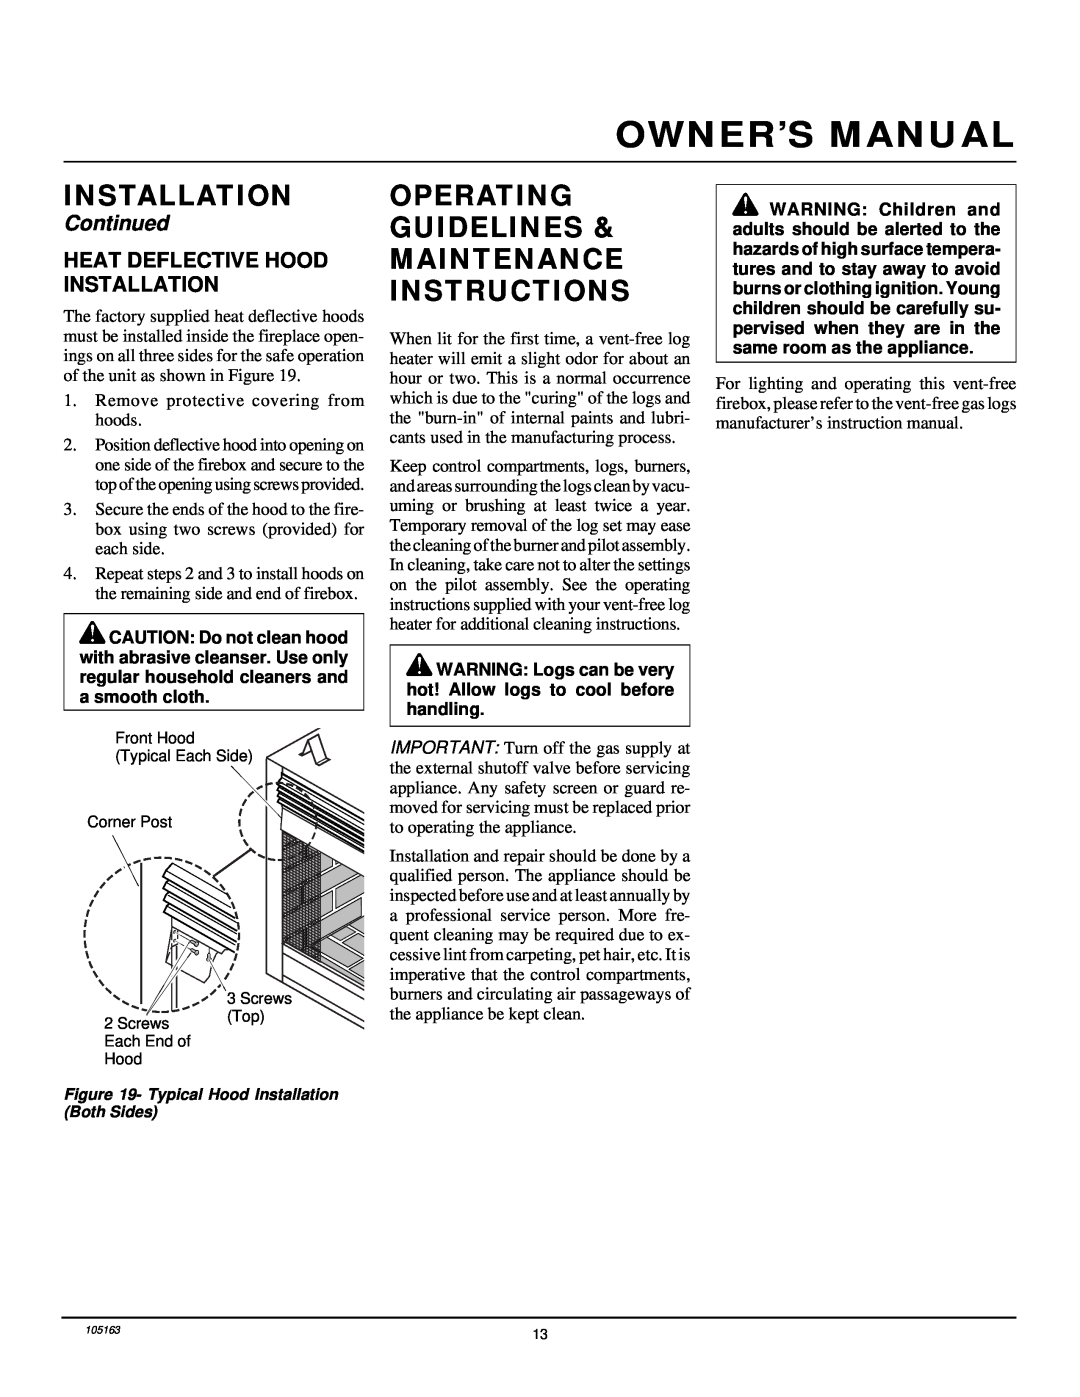 Desa FBPS Operating Guidelines & Maintenance Instructions, Continued, Heat Deflective Hood Installation 